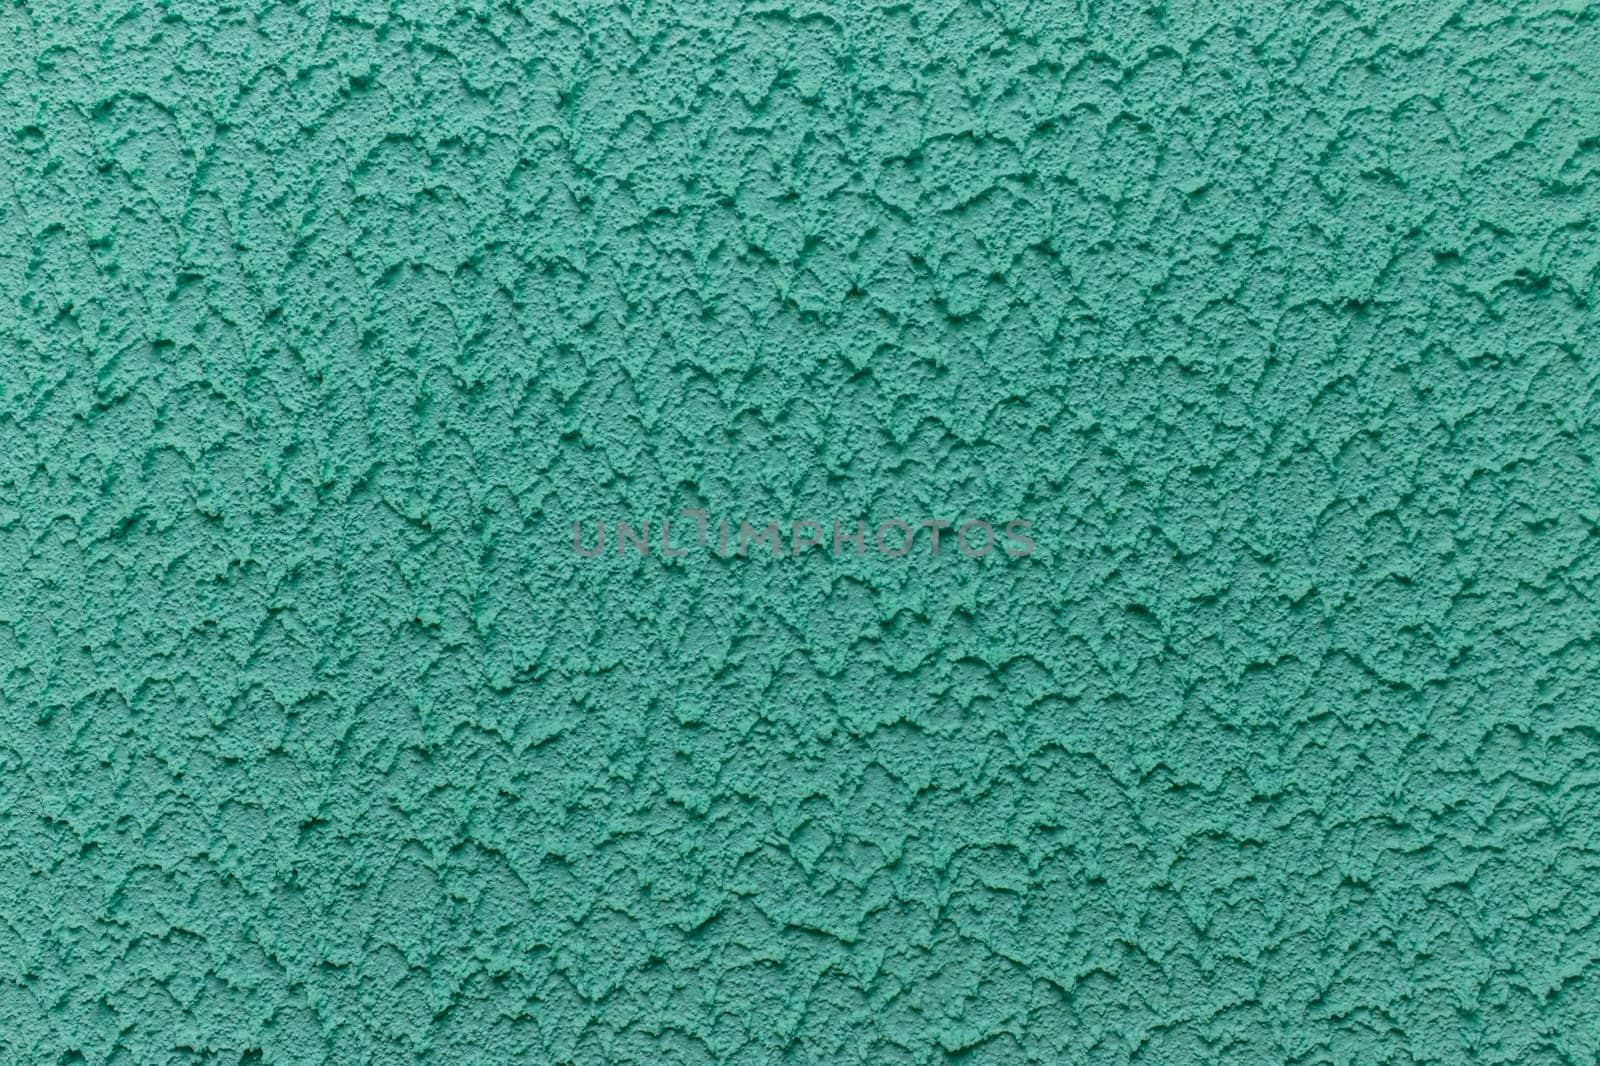 Green aquamarine turquoise azure plaster wall abstract pattern texture coarse surface background rough stucco.